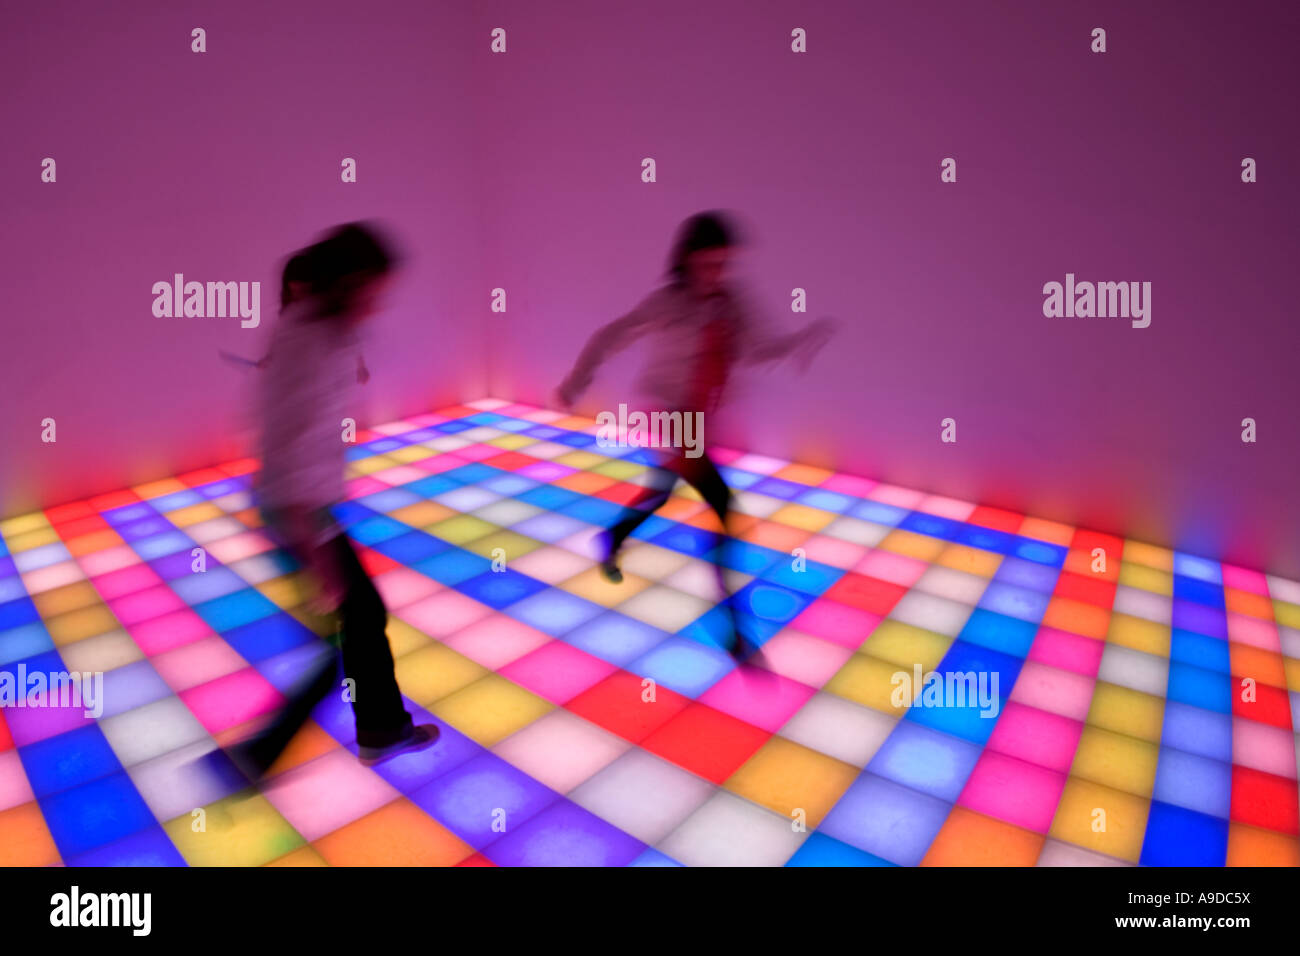 Two young girls playing on illuminated squares art artwork in Guggenheim Museum and Art Gallery New York City NY NYC USA Stock Photo